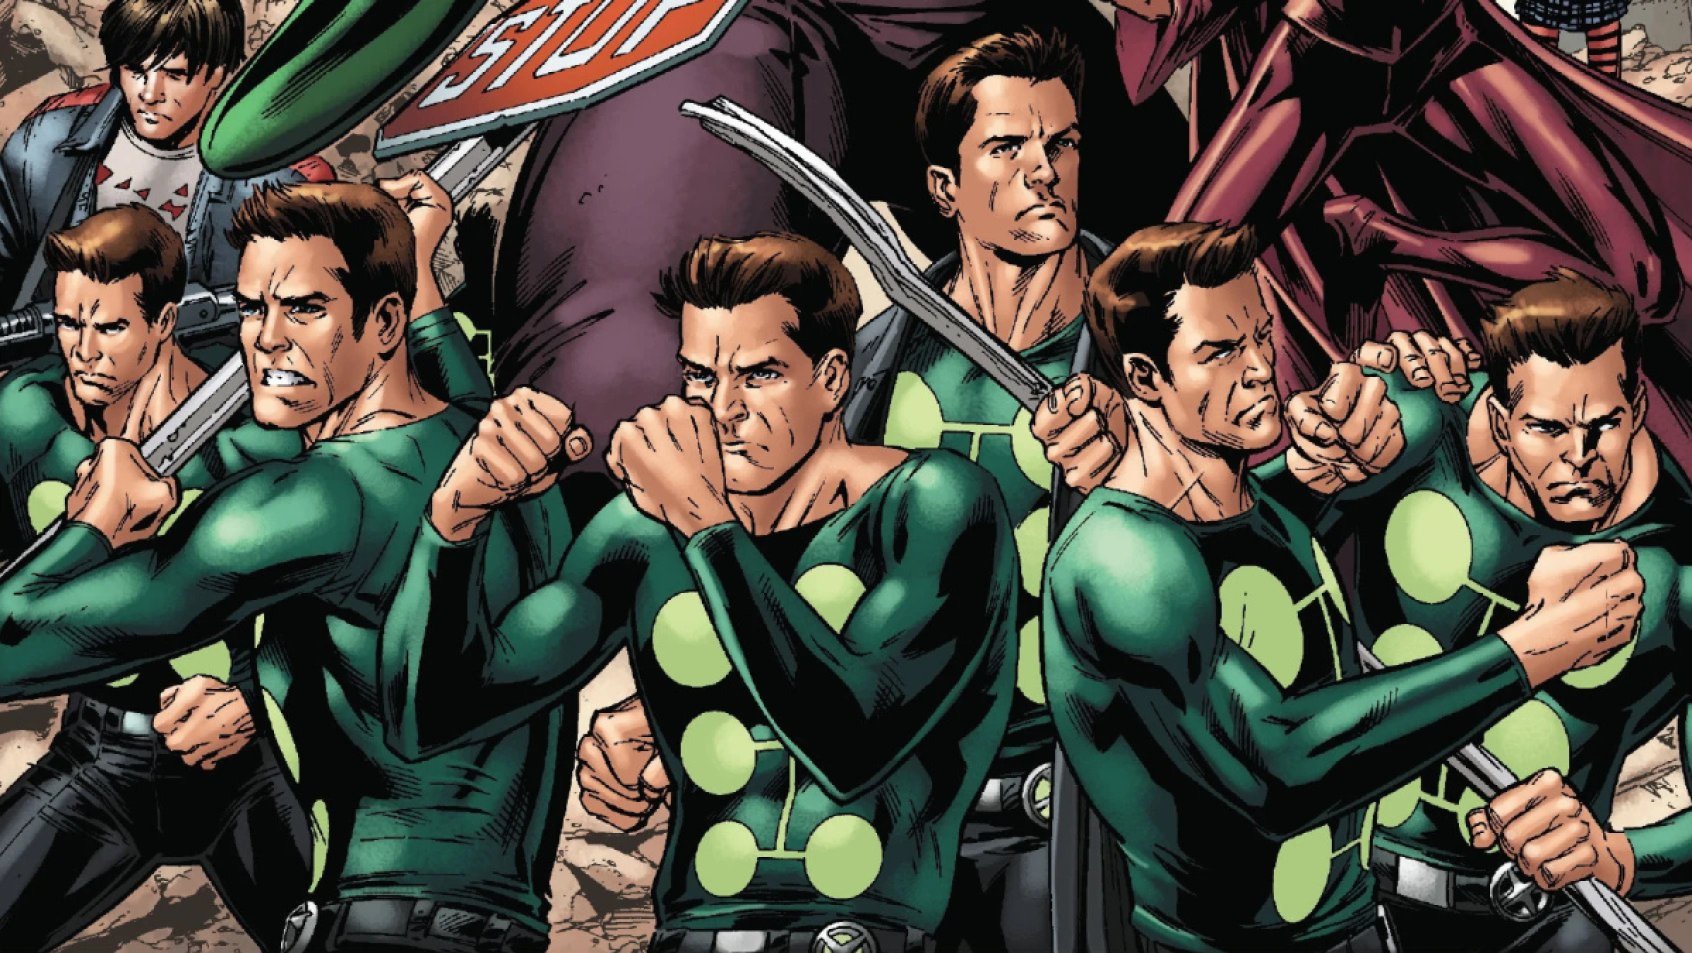 James Madrox as his Multiple Man alter ego in Marvel Comics